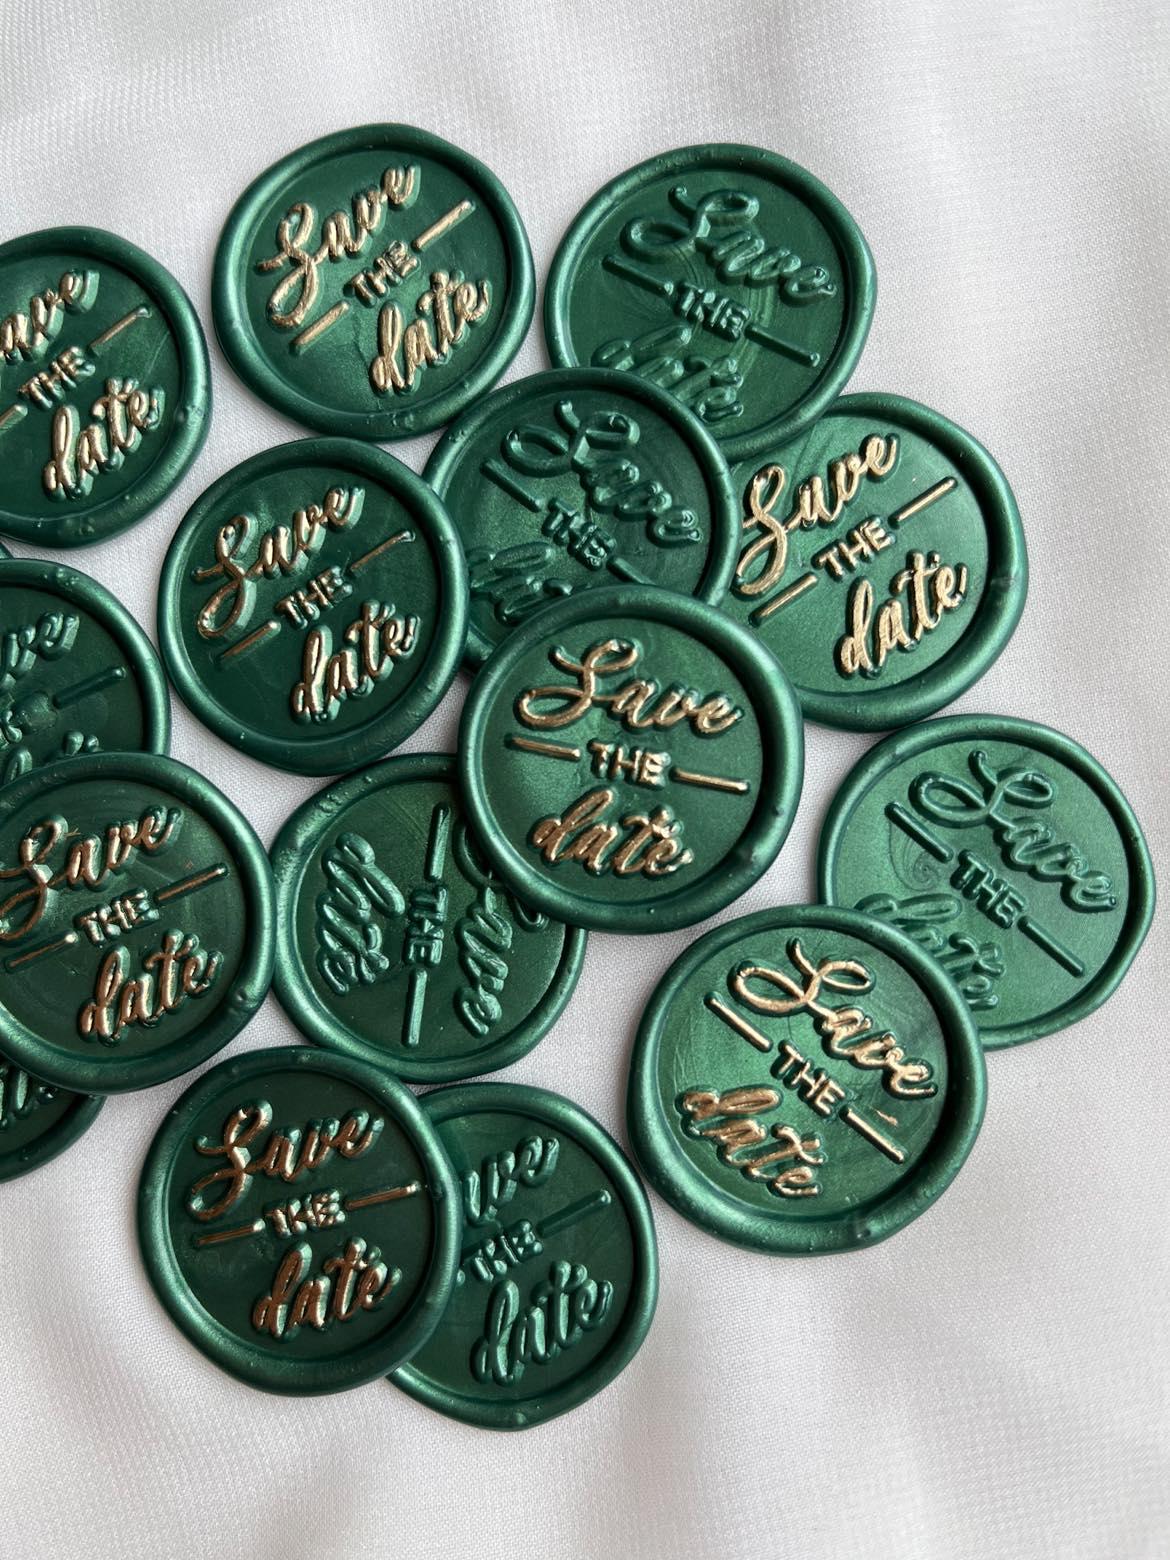 Save The Date wax seals - Set of 9 - Made of Honour Co.